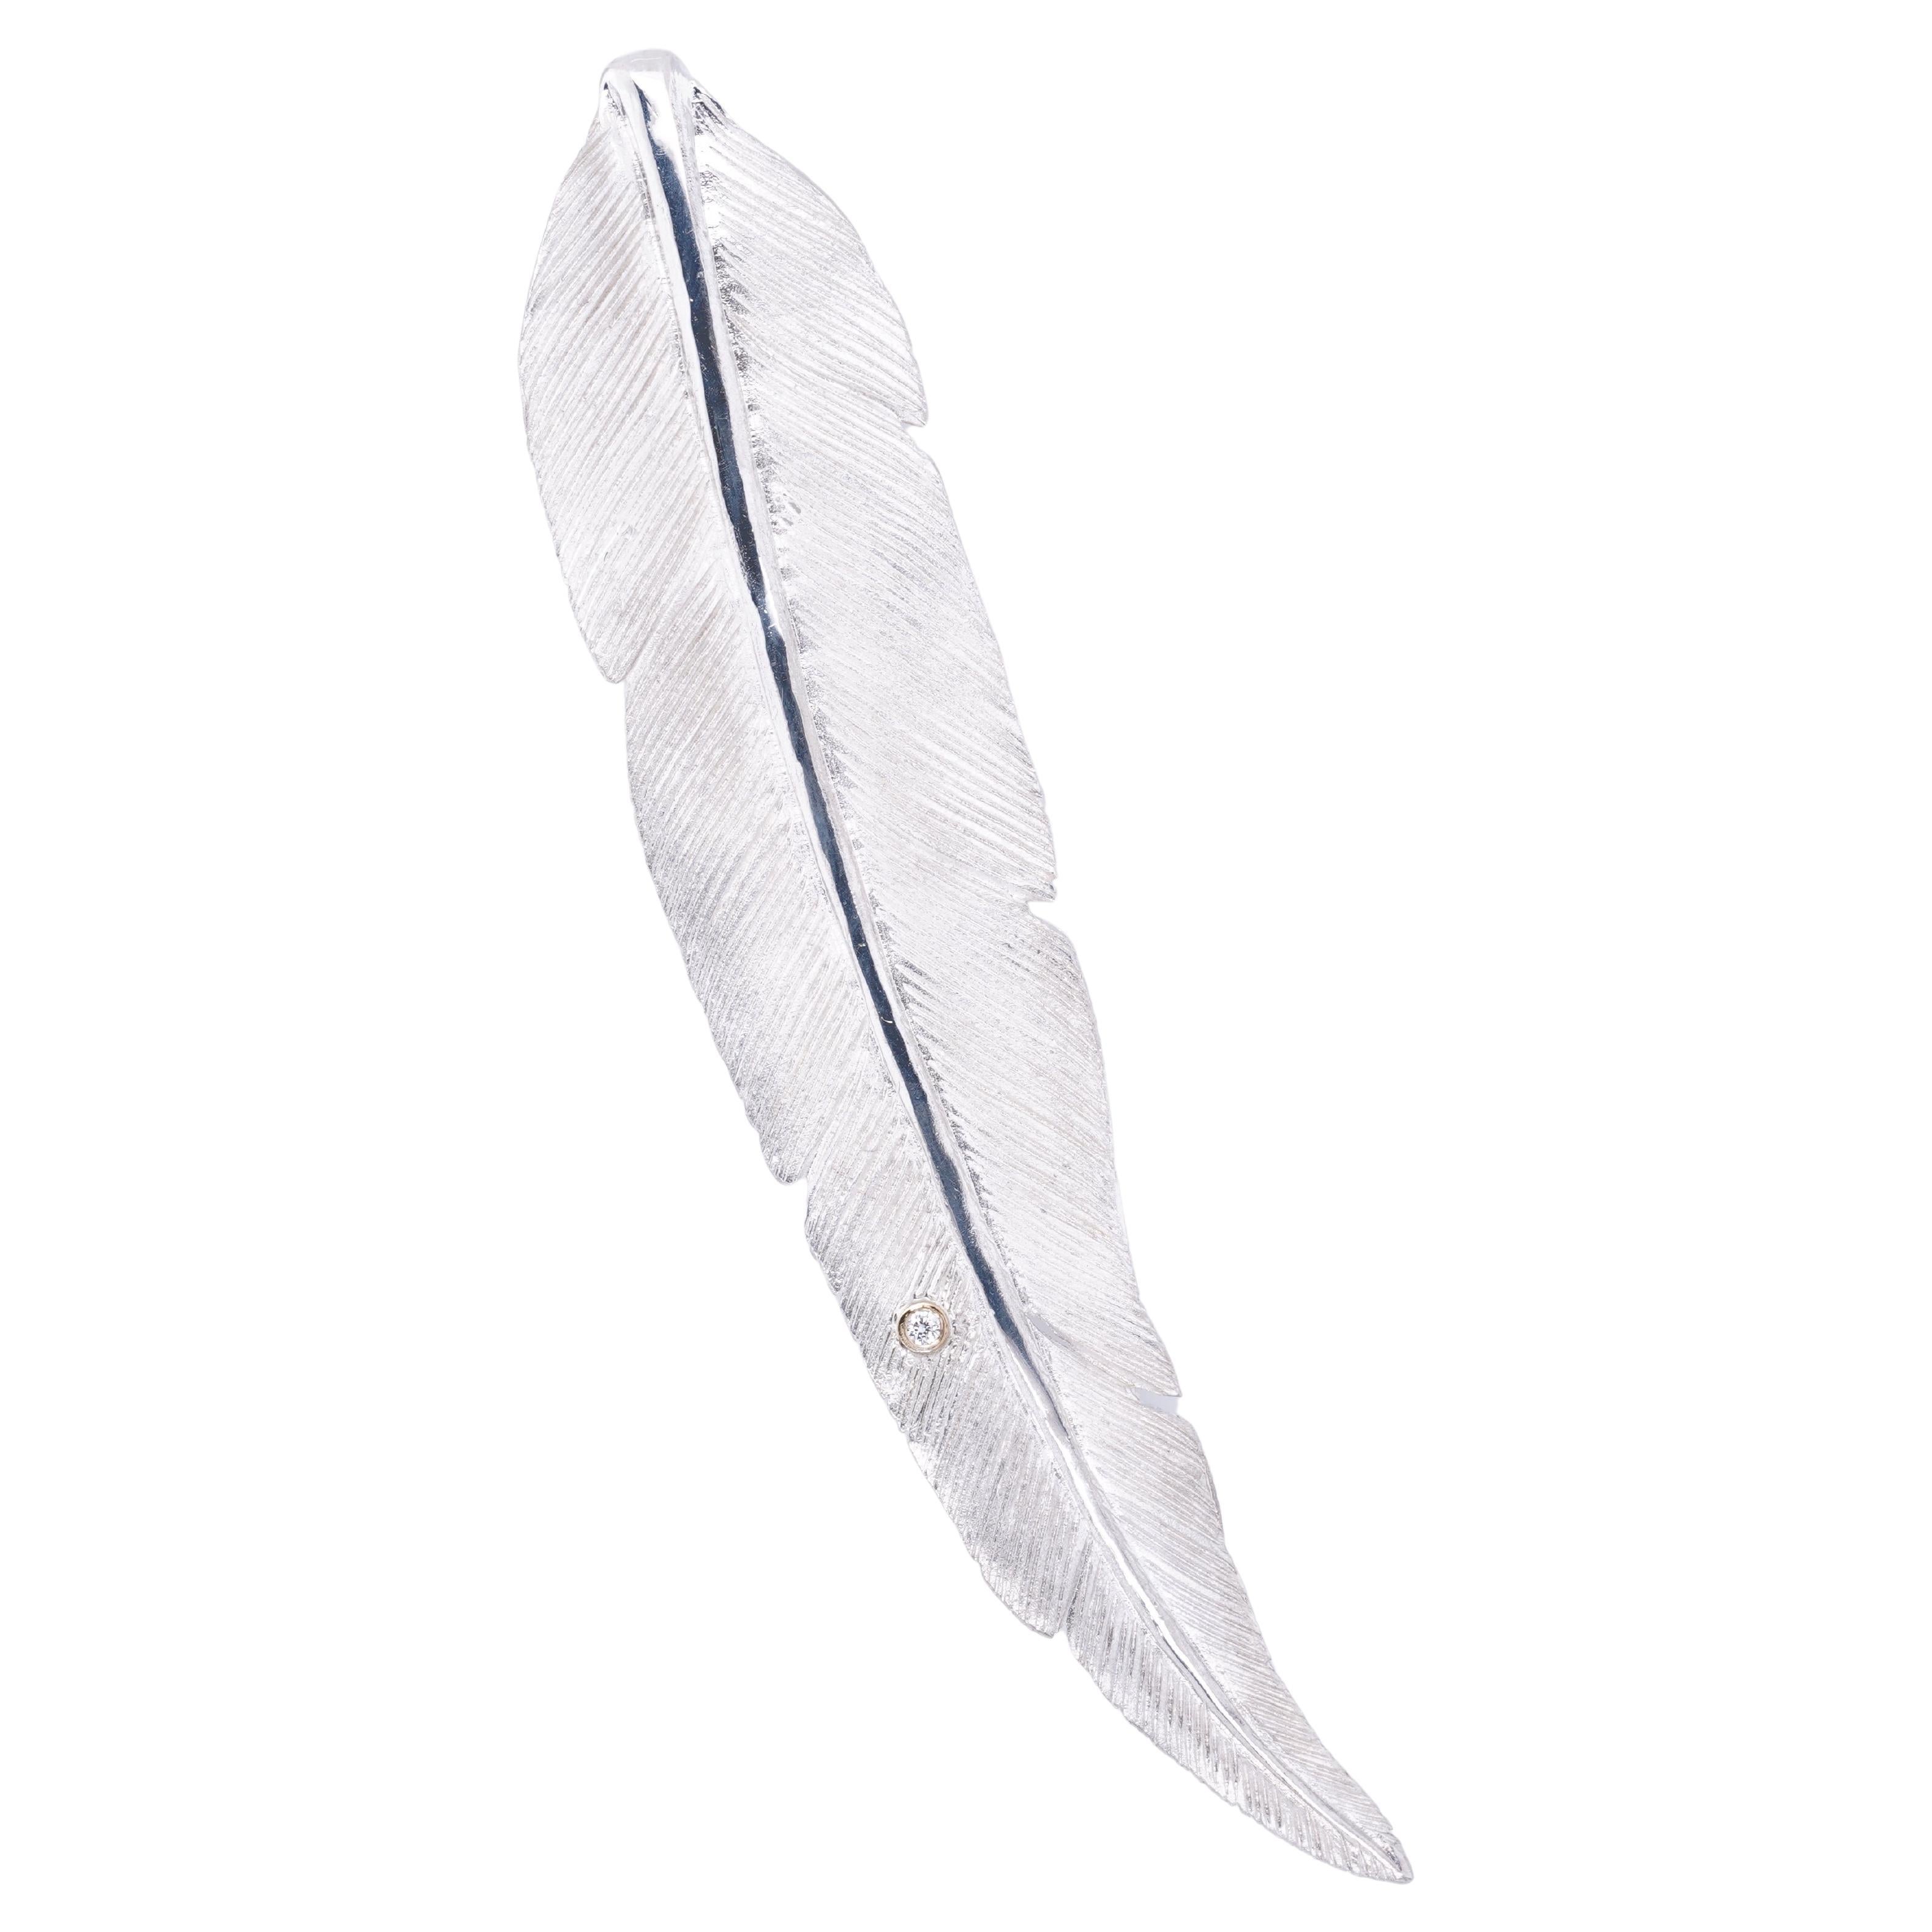 Large Sterling Silver Detailed Bird Feather Brooch Pin with Diamond Detail by Ashley Childs

This feather was originally carved by 